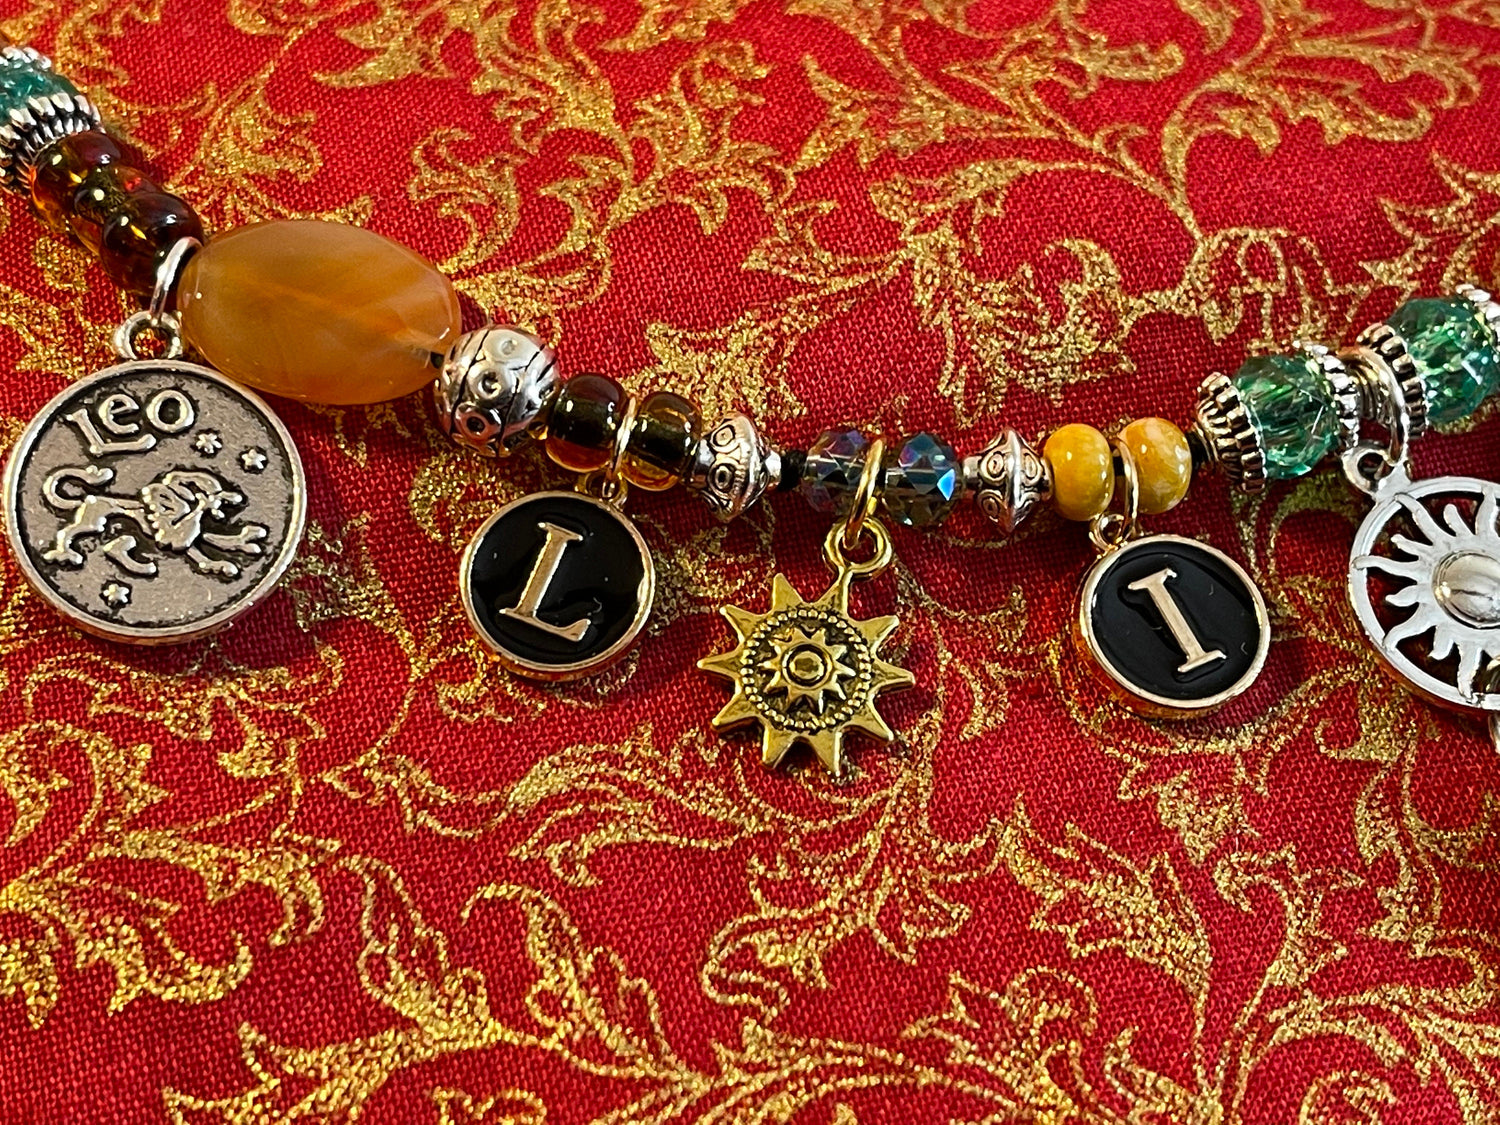 LION Leo necklace–enamel letters, silver toggle–St. Mamas riding lion, Ethiopian lion coins–animal charms–picture jasper–crystal (astrology)